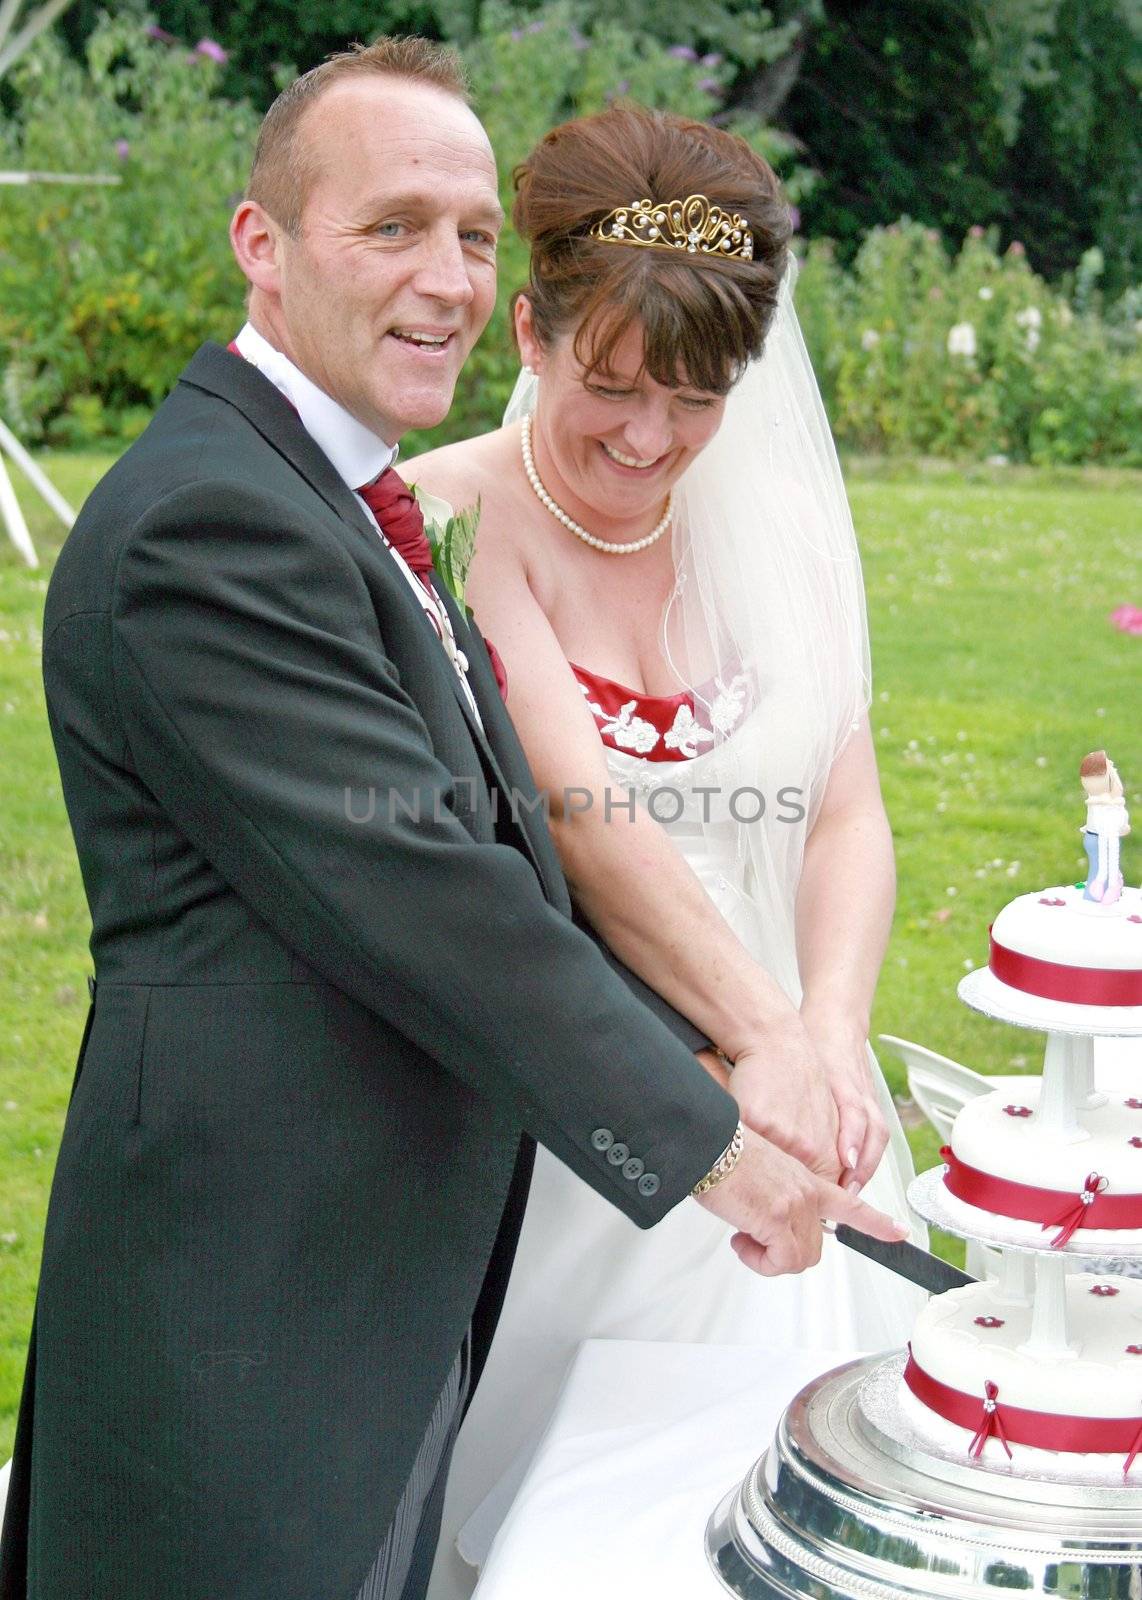 Mature, Happy, Bride and Groom Cutting the Cake at their Wedding Reception.